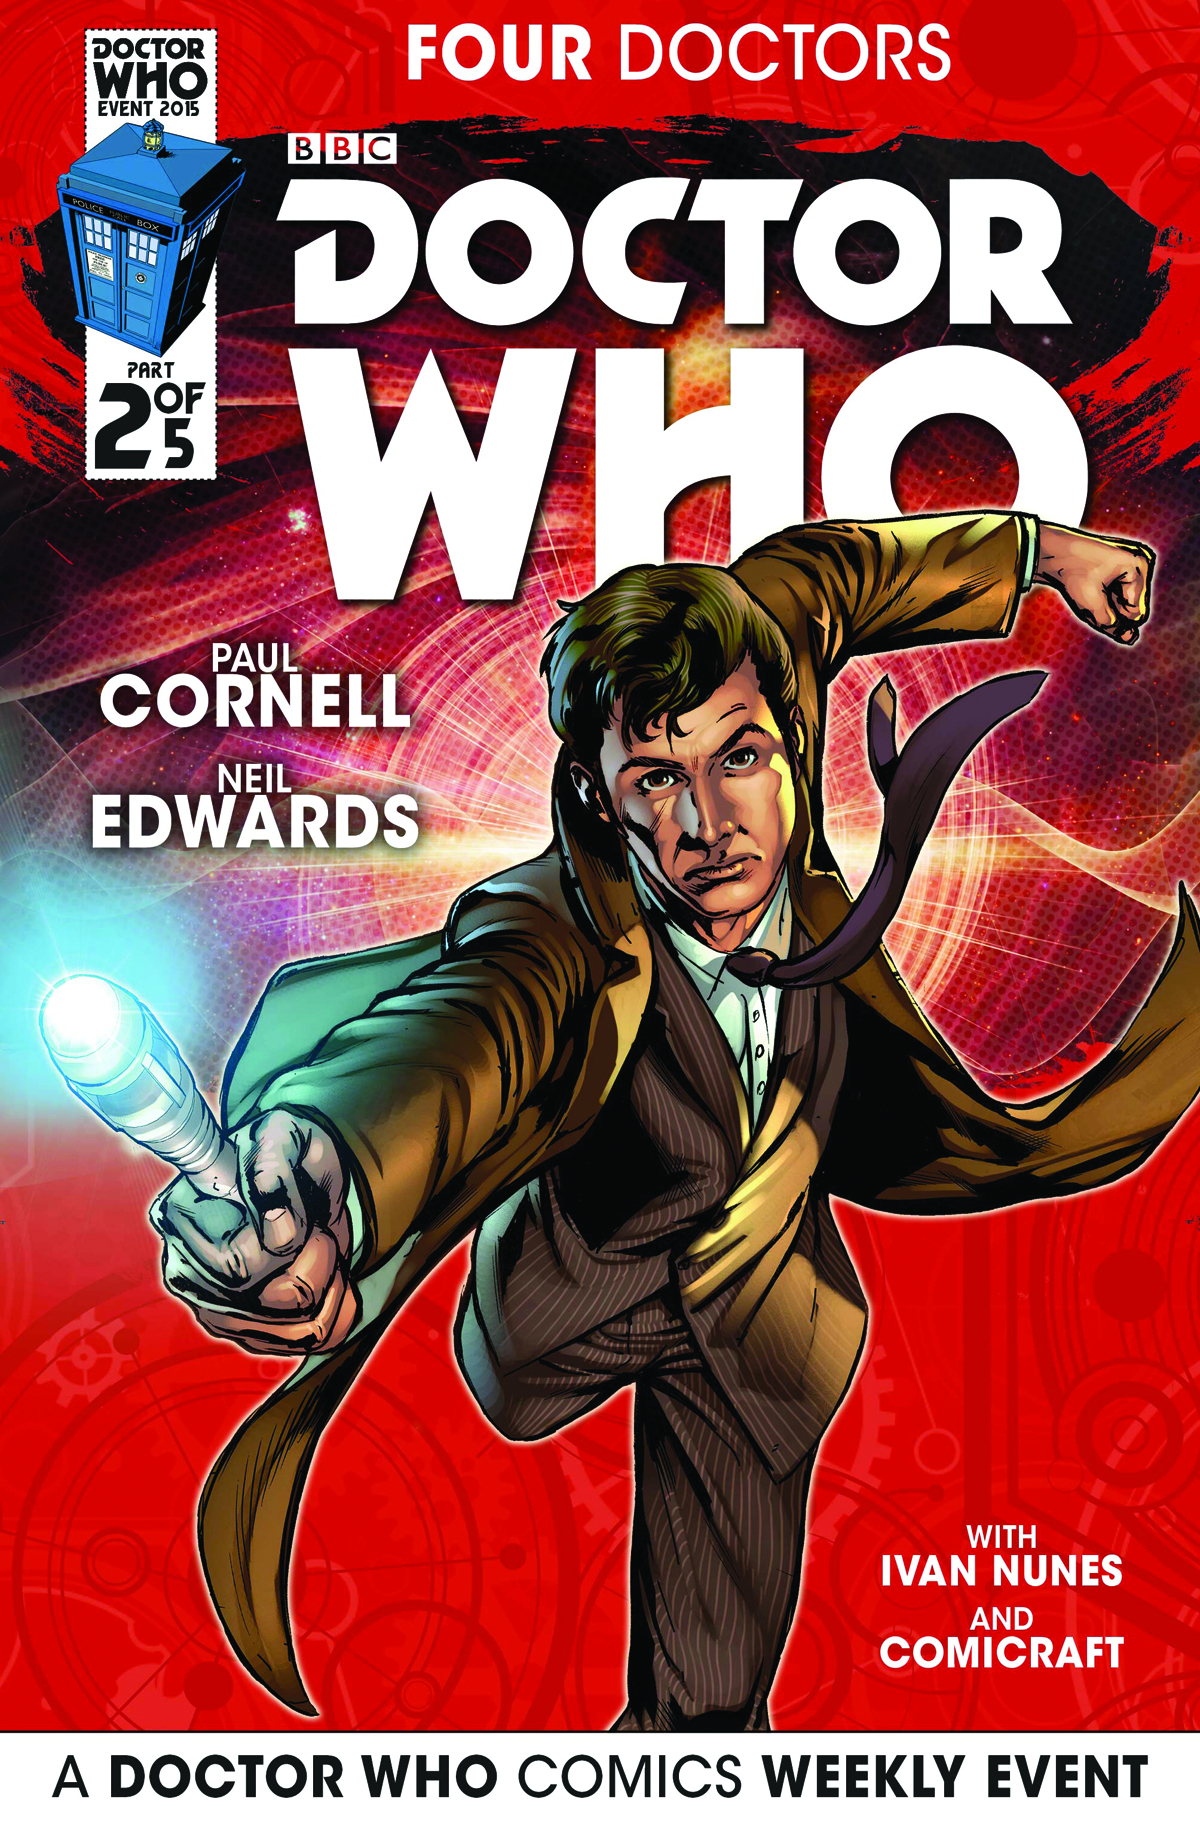 DOCTOR WHO 2015 FOUR DOCTORS #2 (OF 5) REG EDWARDS